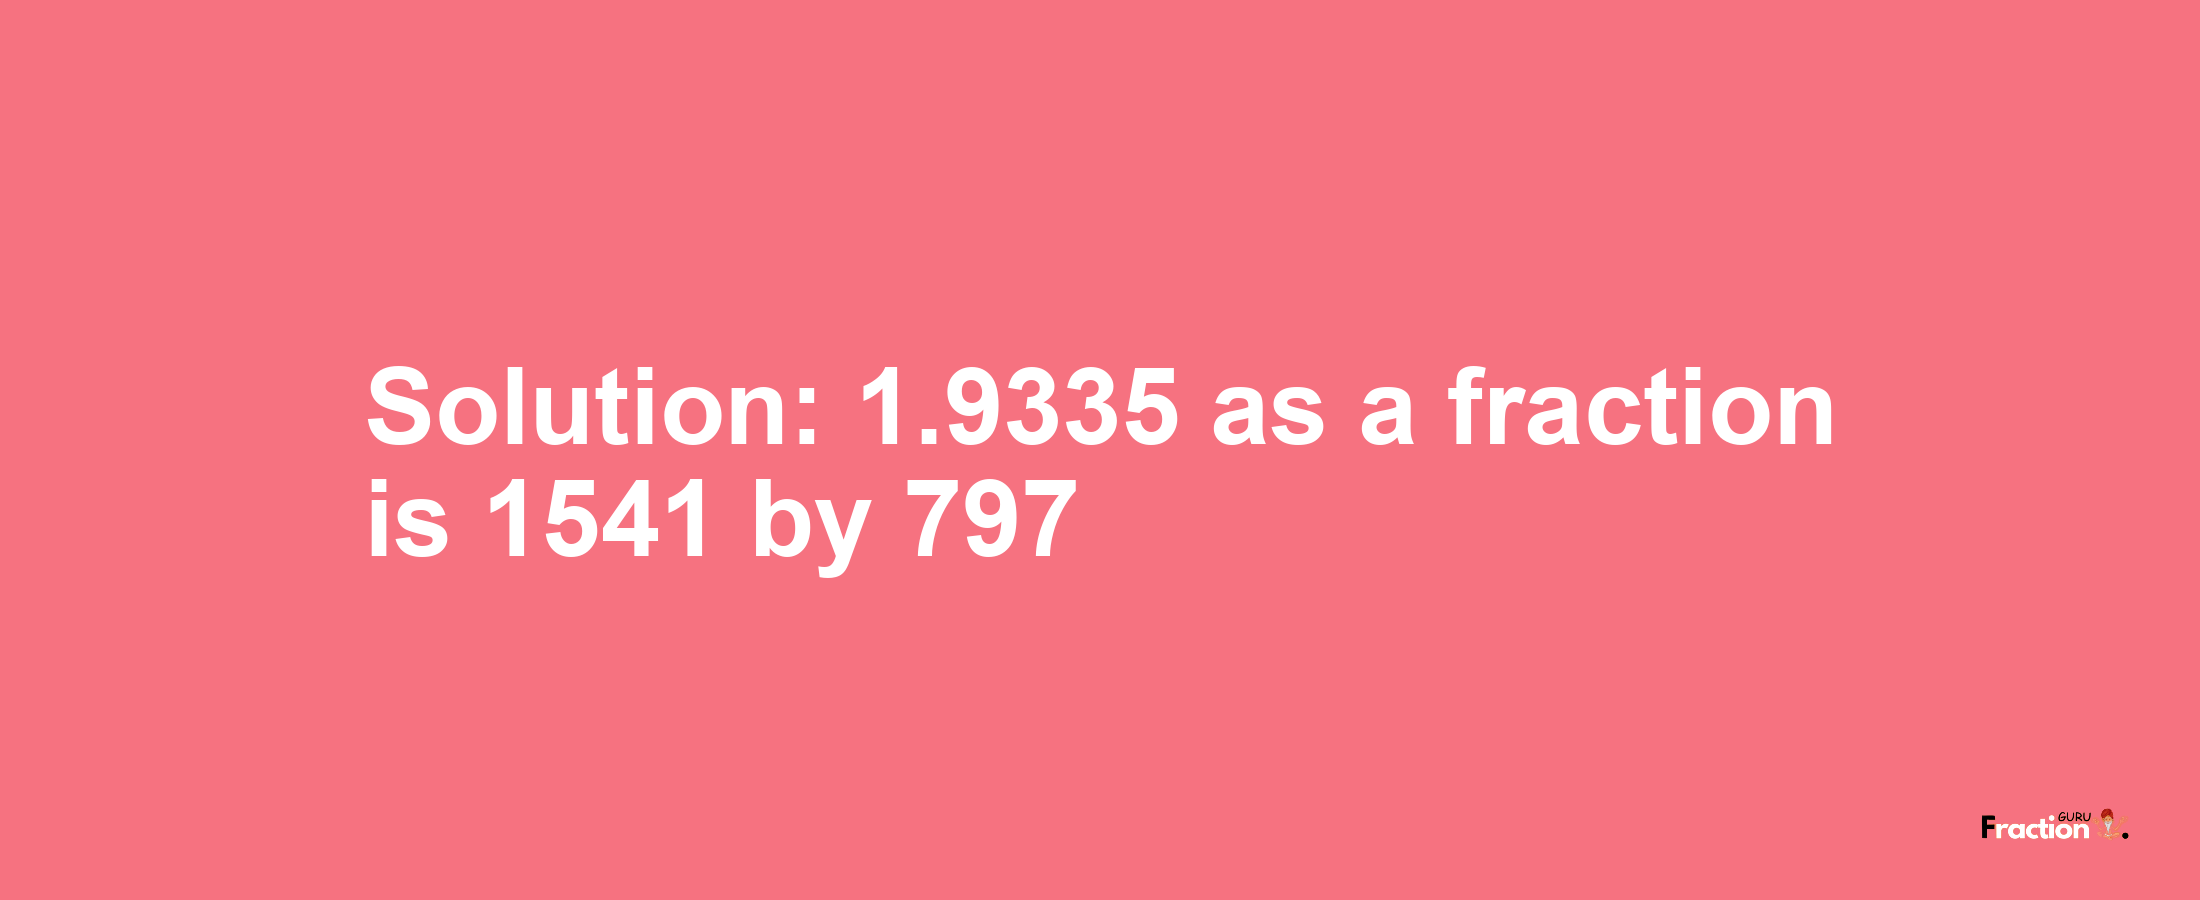 Solution:1.9335 as a fraction is 1541/797